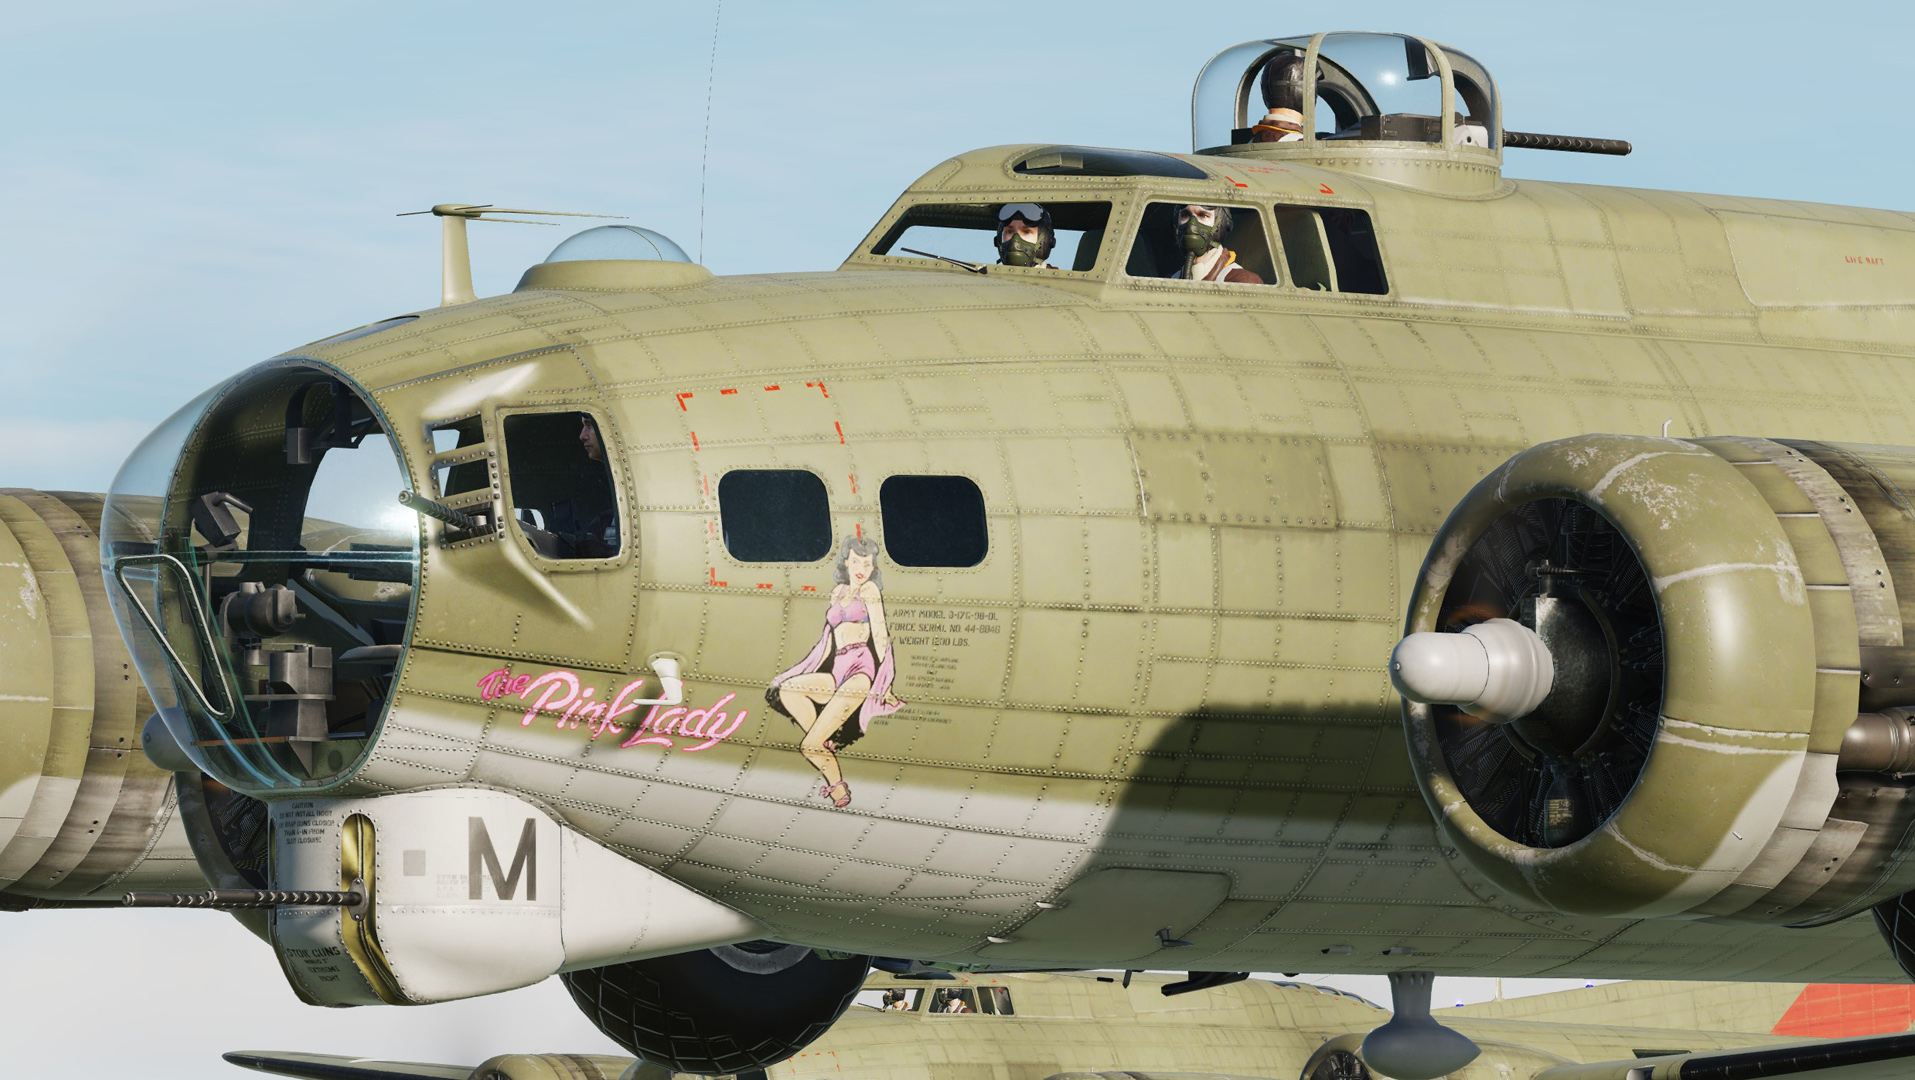 B-17G 44-8846 “The Pink Lady”